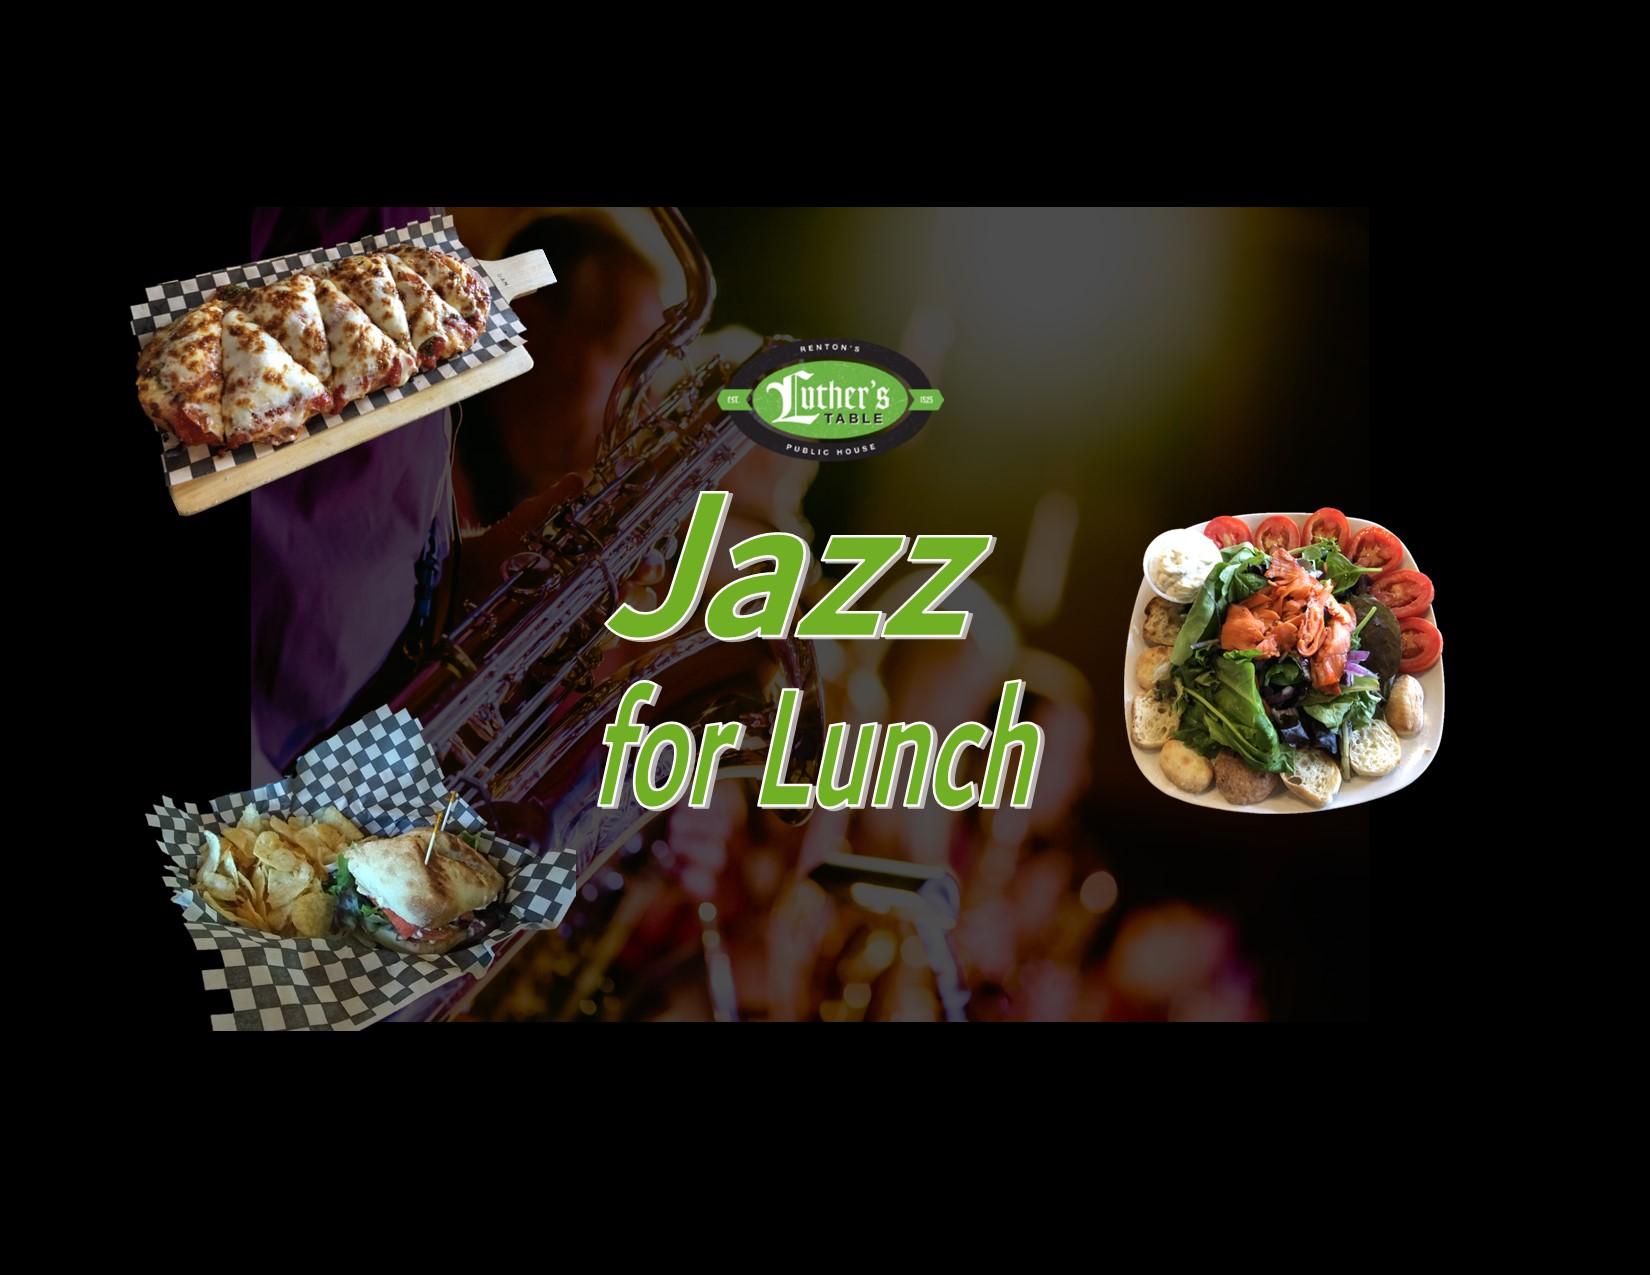 Live Jazz Music for Lunch!